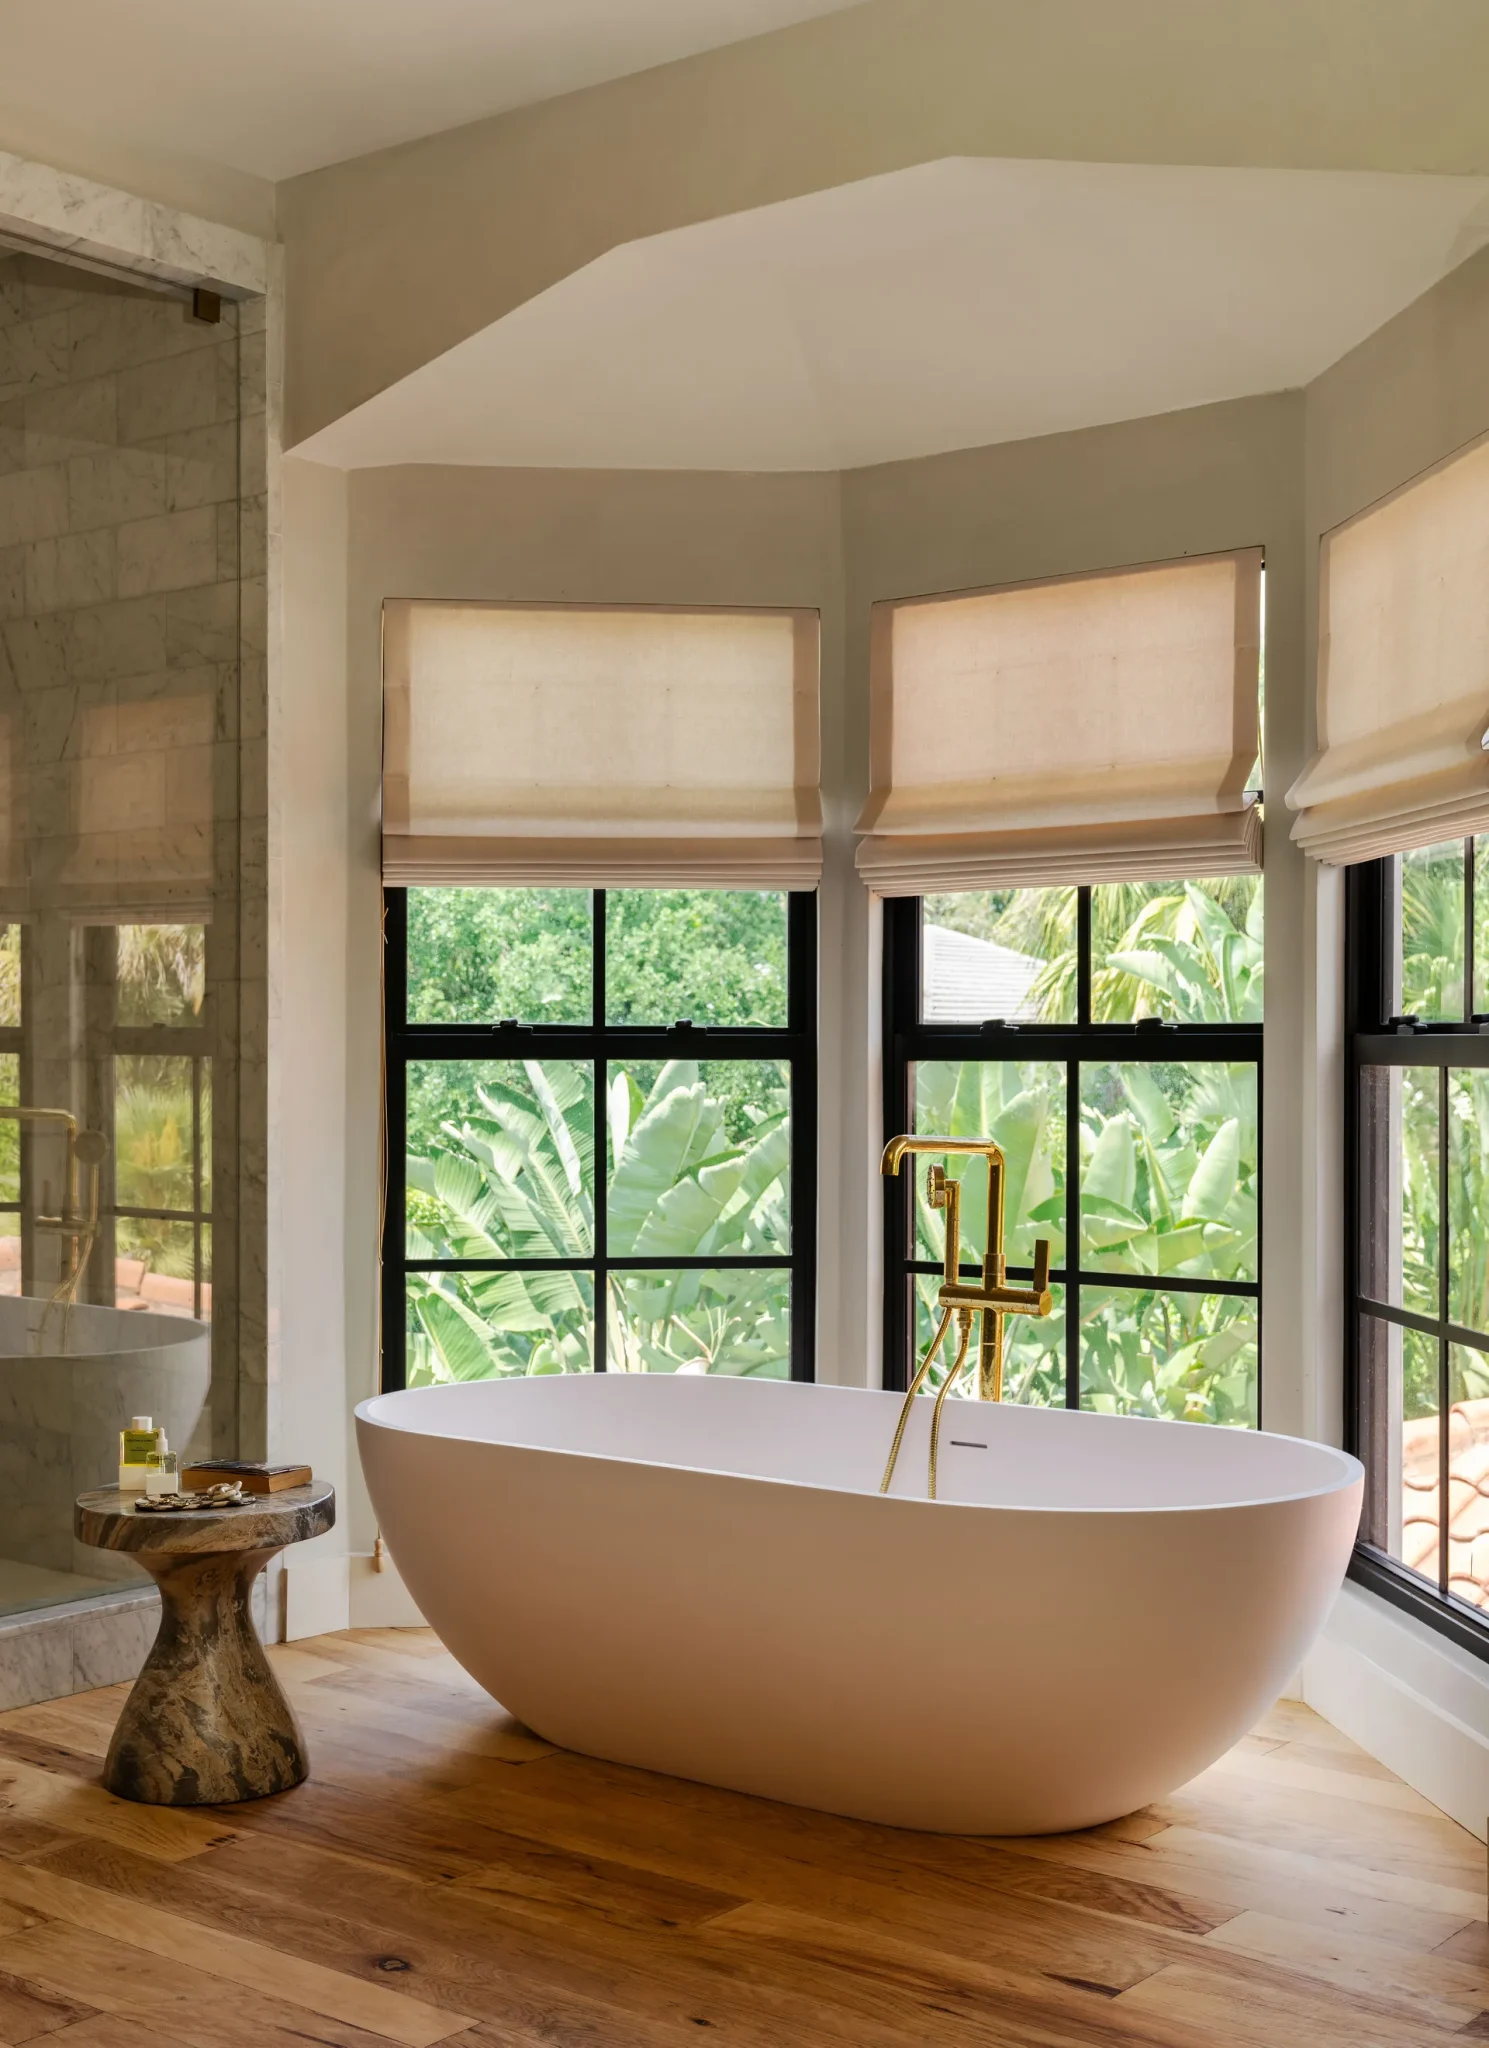 Bathroom featuring a freestanding bathtub and a stone sidetable for support